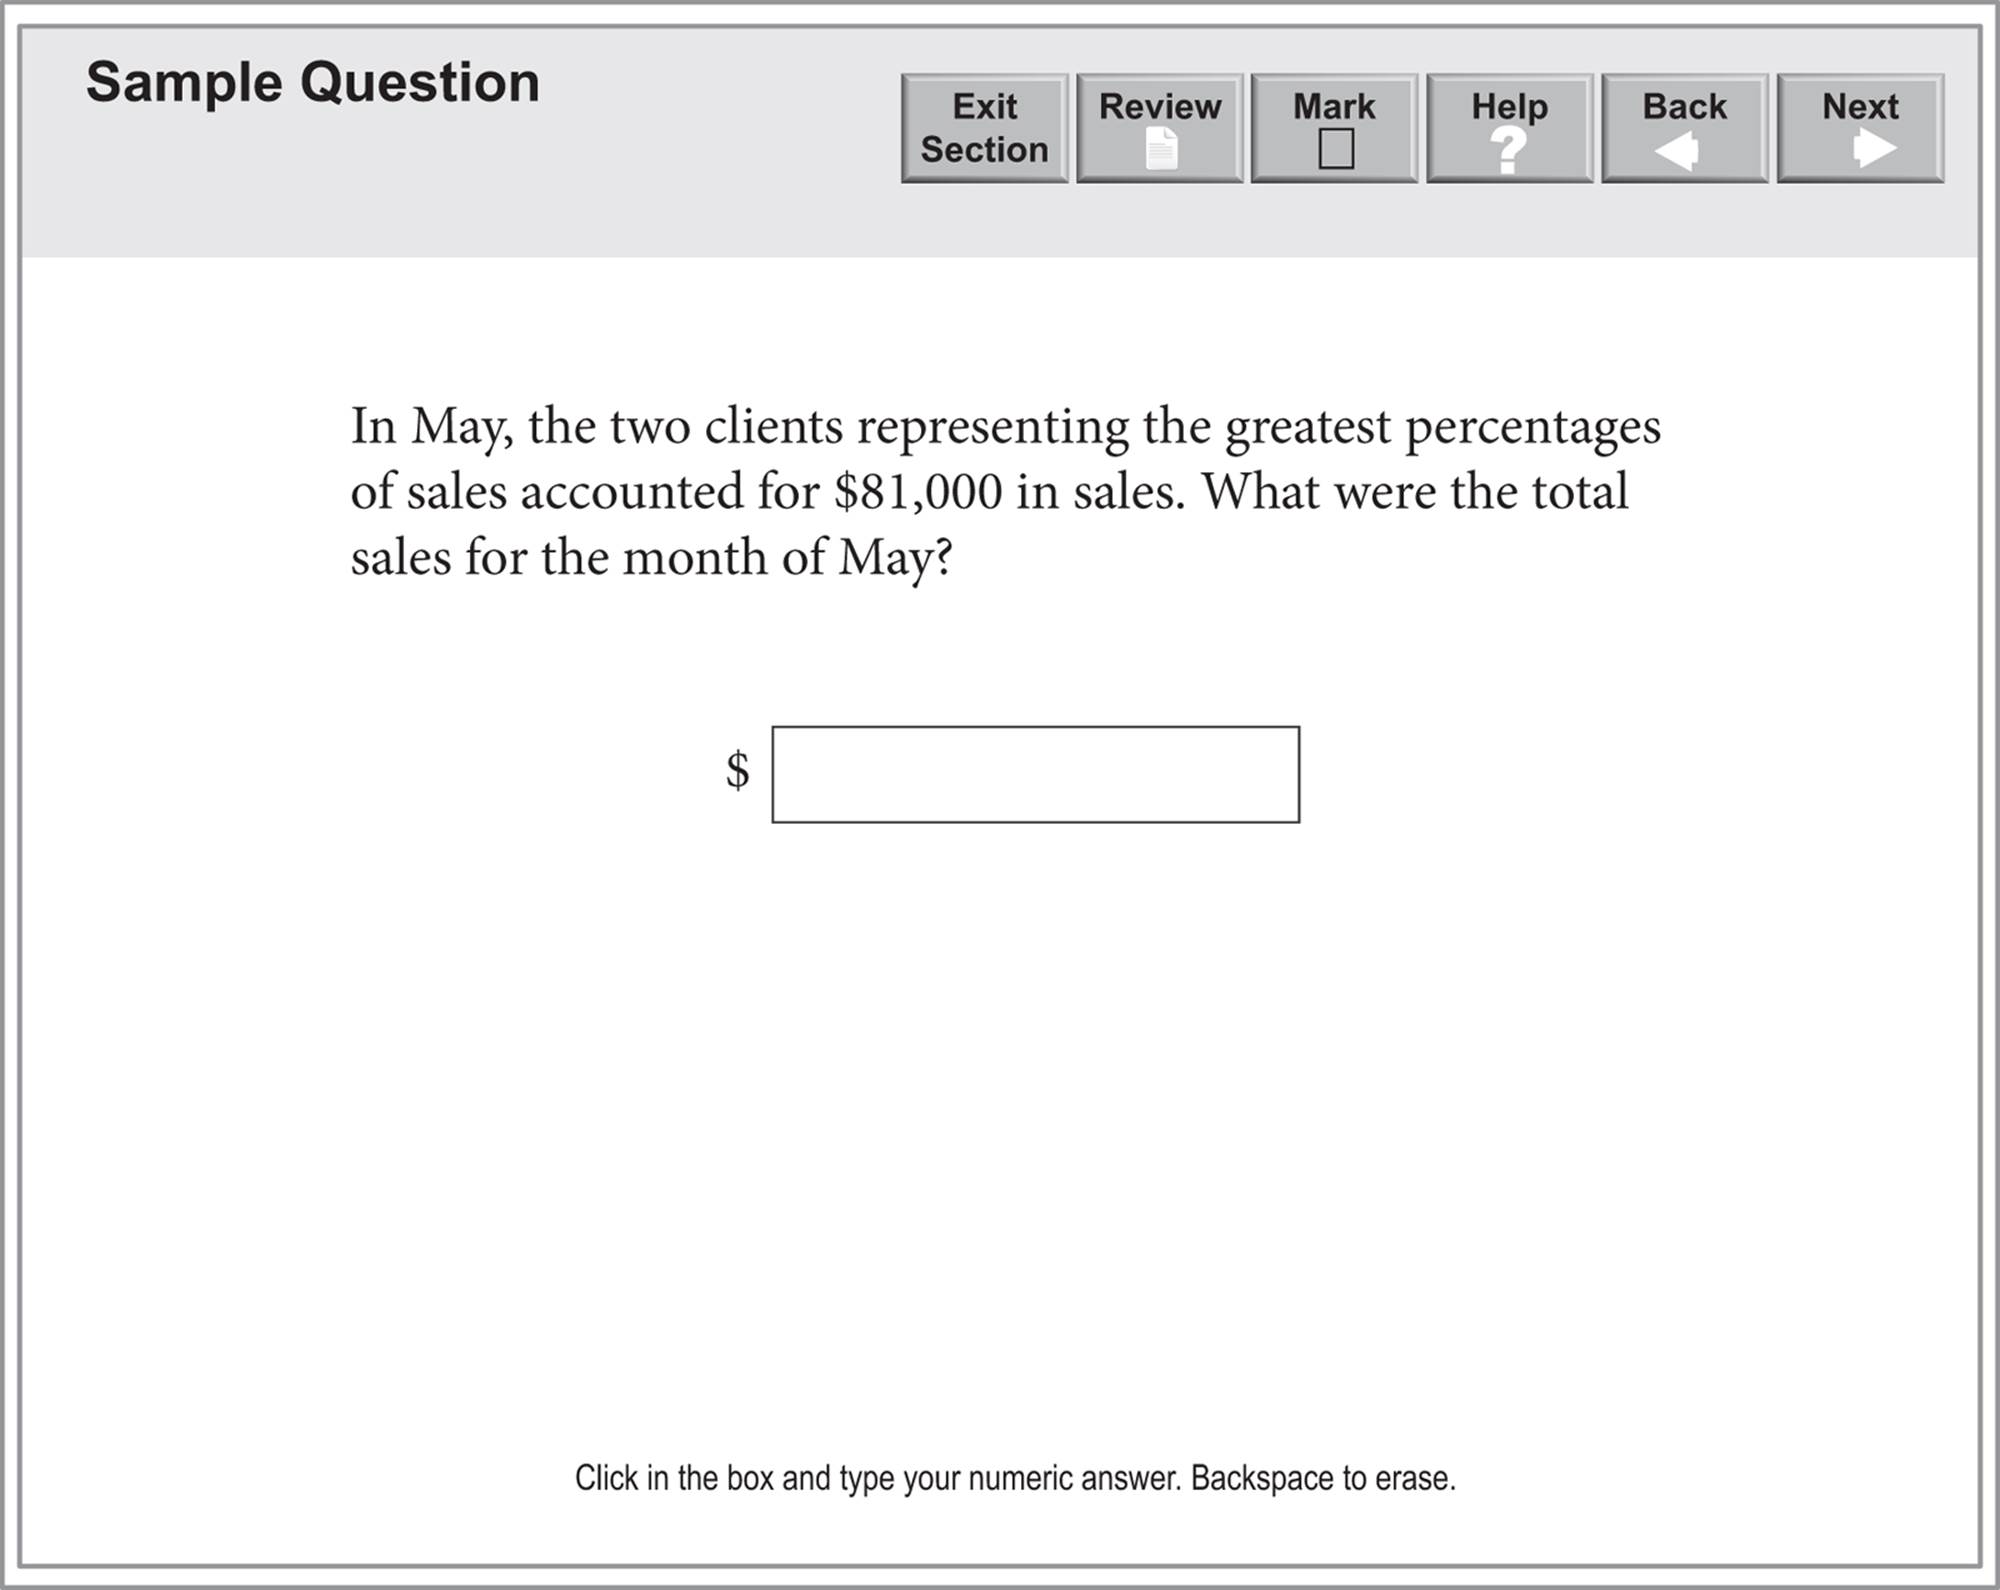 A problem solving question: "In May, the two clients representing the greatest percentages of sales accounted for $81,000 in sales. What were the total sales for the month of May?" For the answer, there is a blank box after the dollar sign.